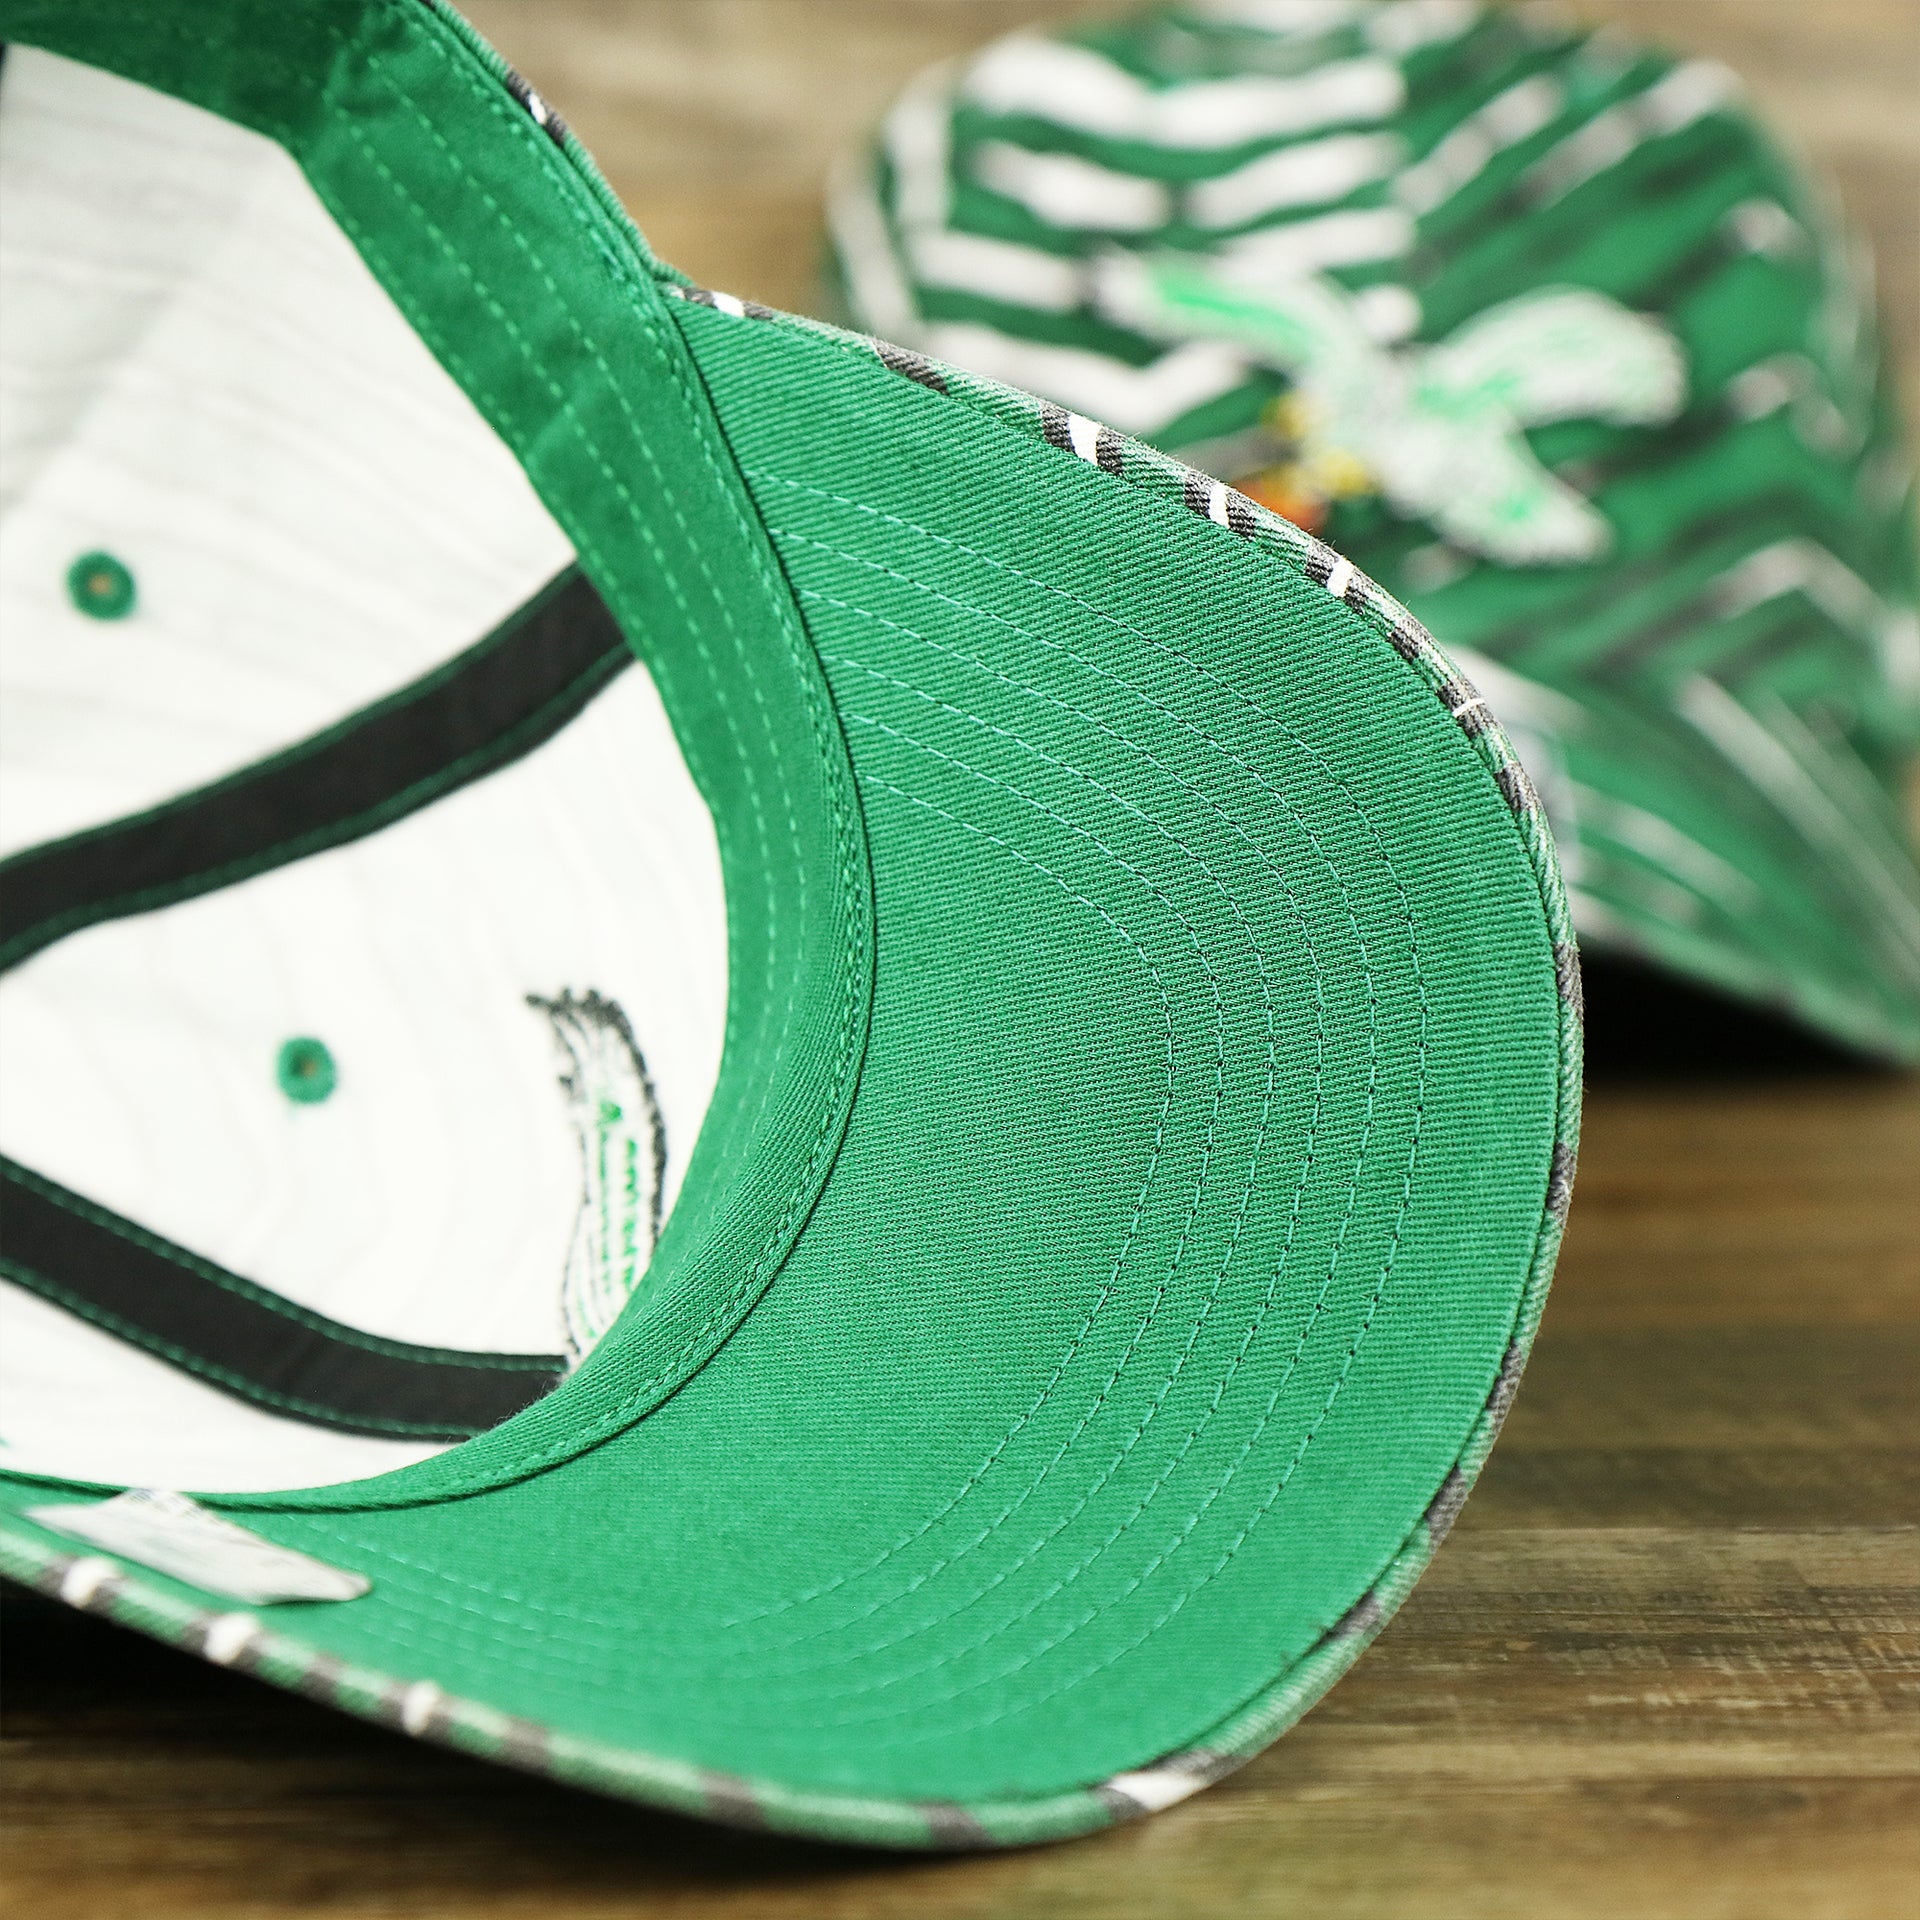 The undervisor on the Throwback Philadelphia Eagles Zubaz Striped Pattern Dad Hat | Kelly Green Dad Hat